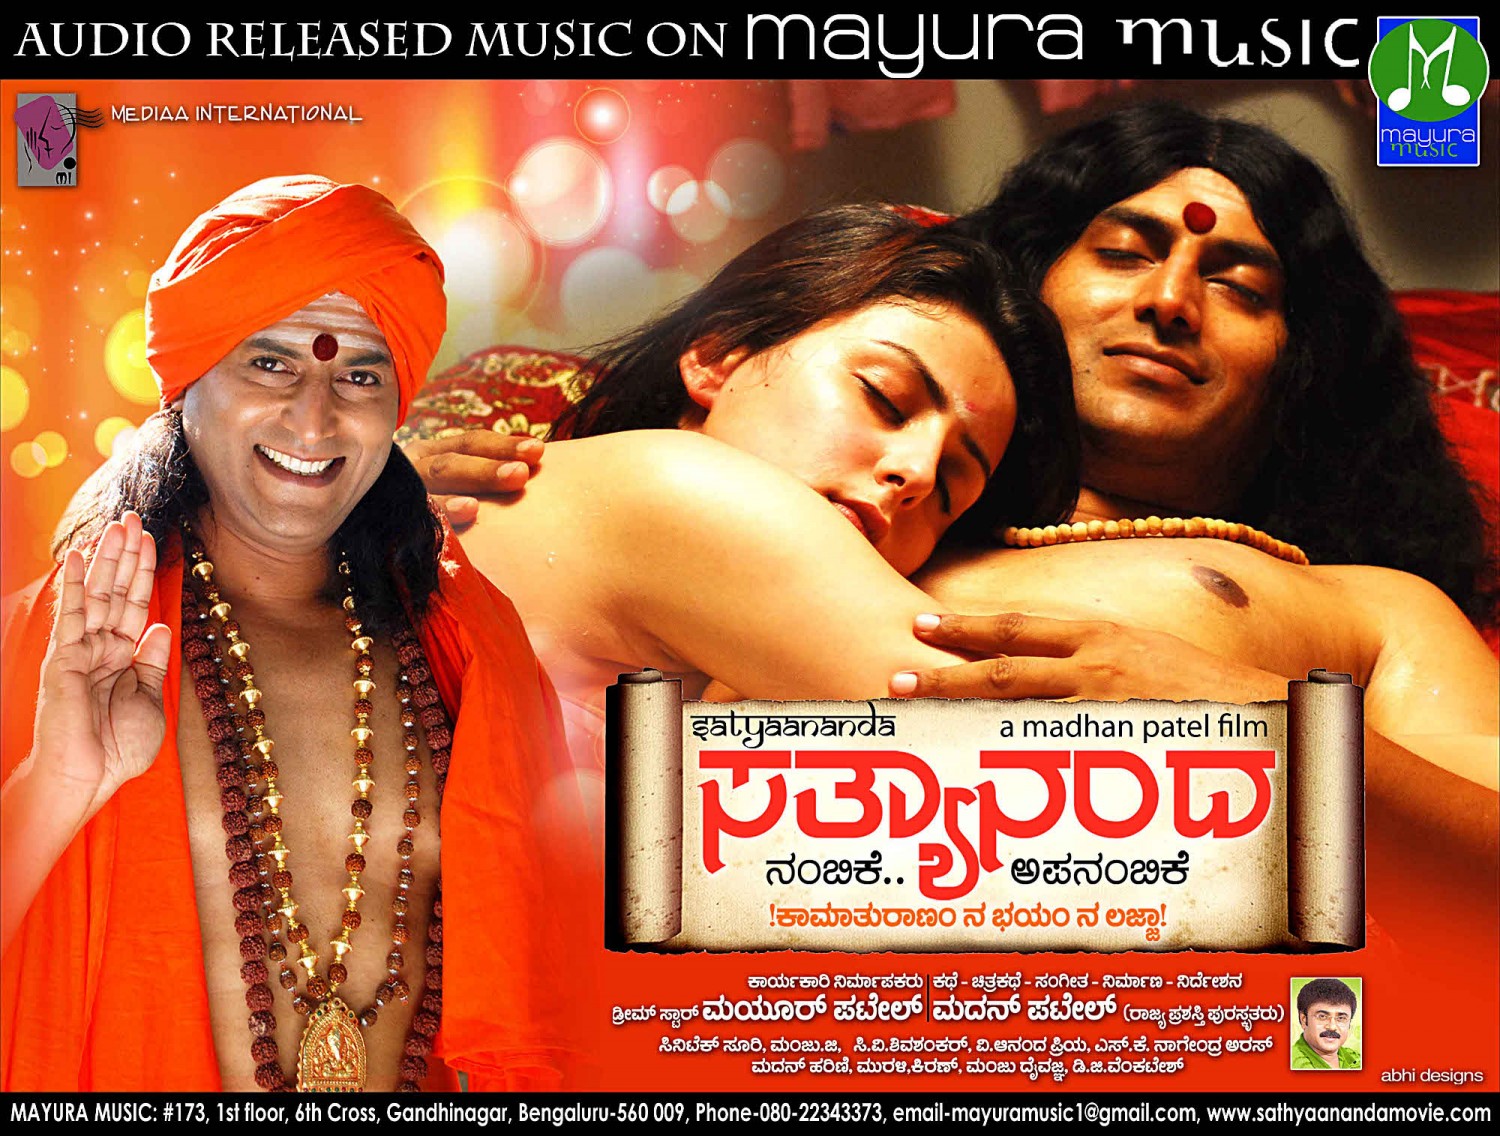 Extra Large Movie Poster Image for Sathyaananda (#6 of 17)